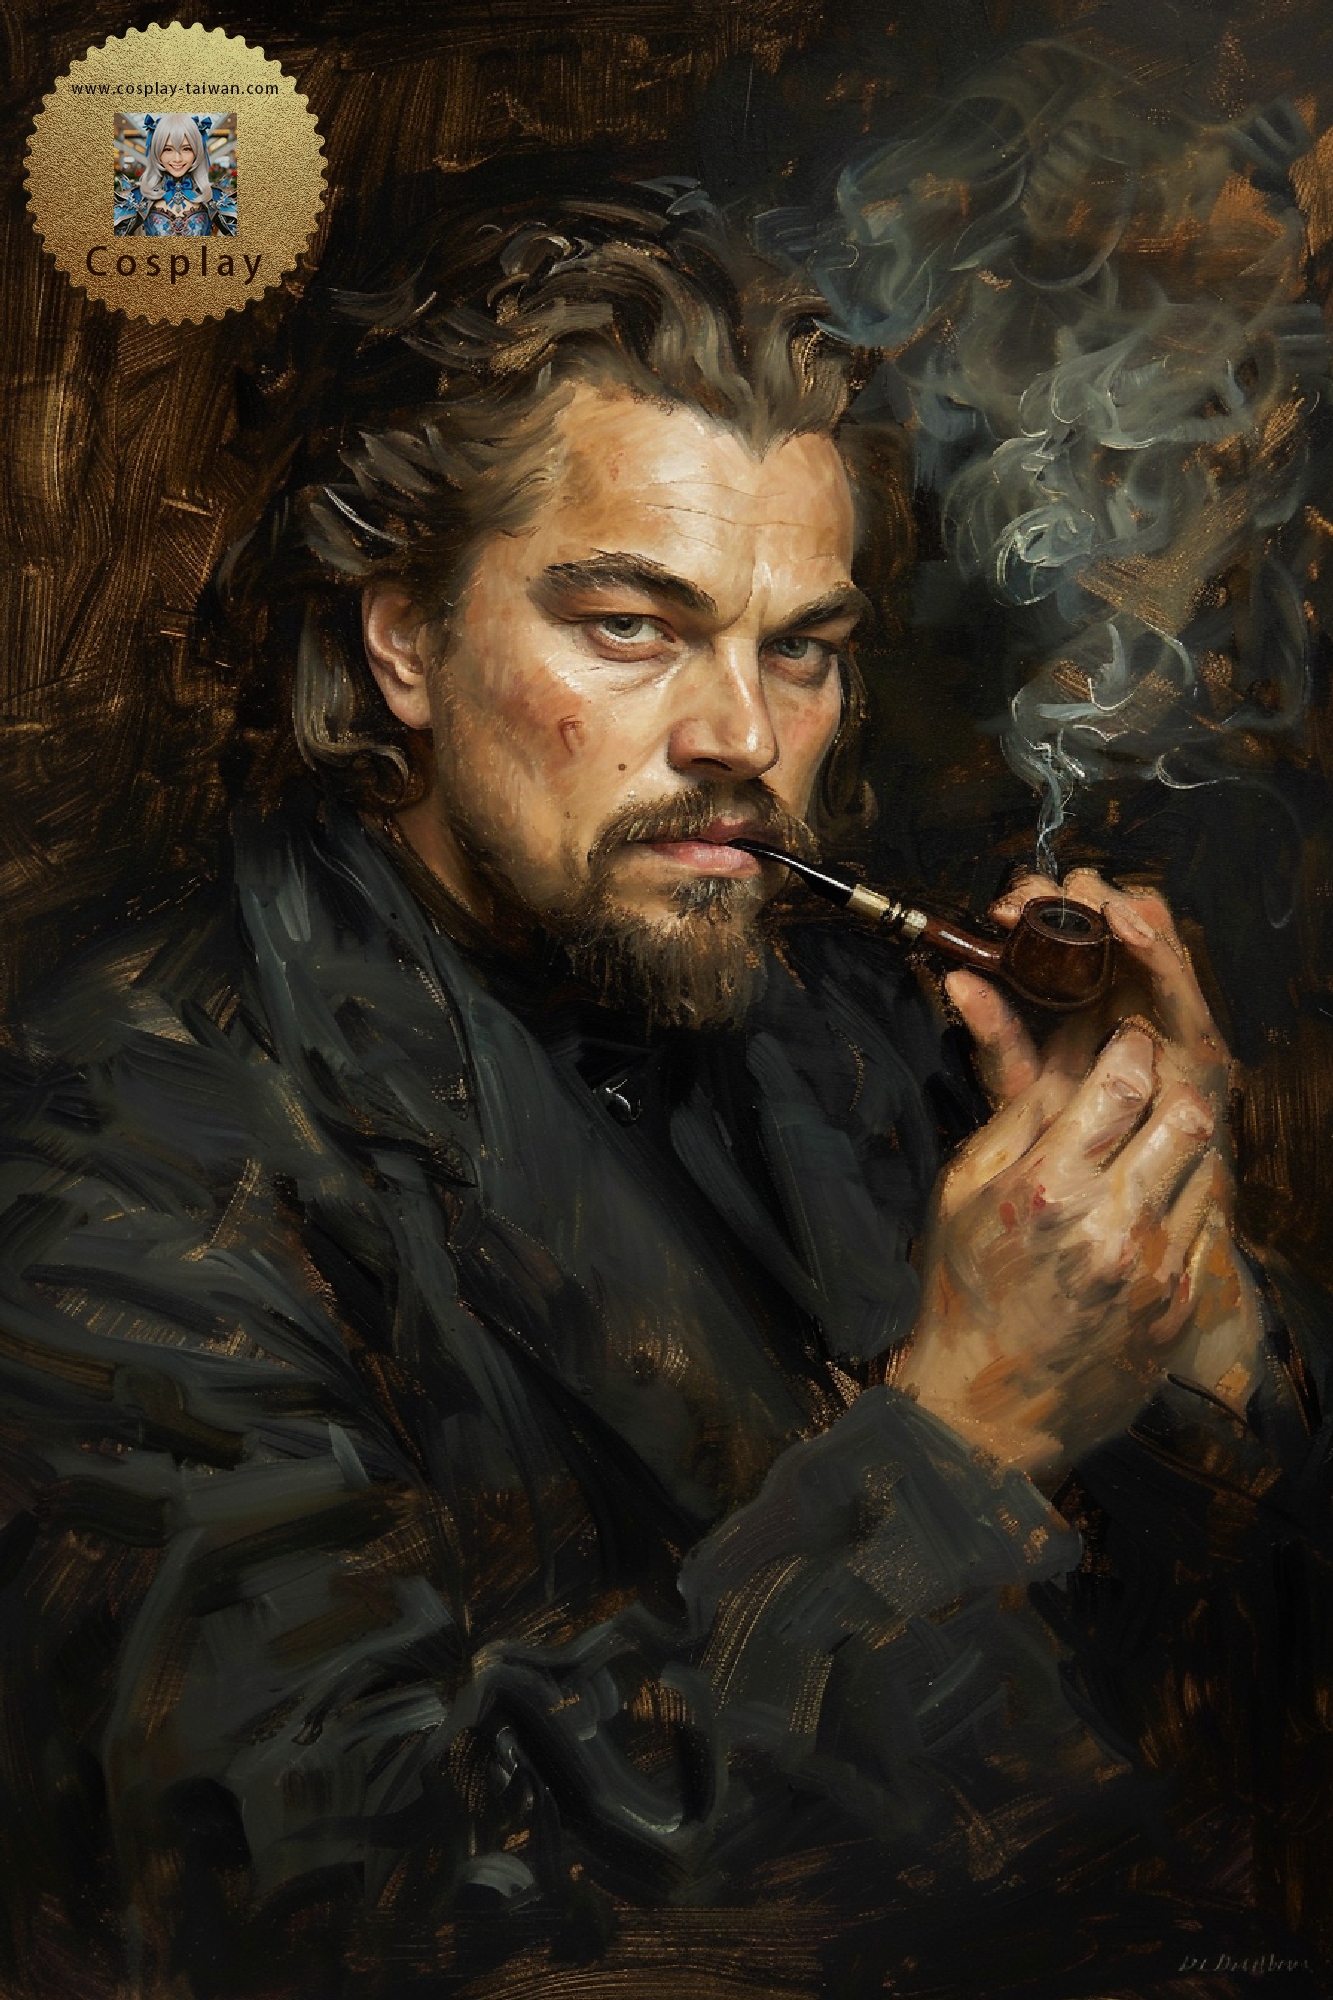 leonchou1968_Paint_an_oil_painting_of_Leonardo_DiCaprio_smoking_04c56190-4704-45e4-be7a-ee694d522af7.png